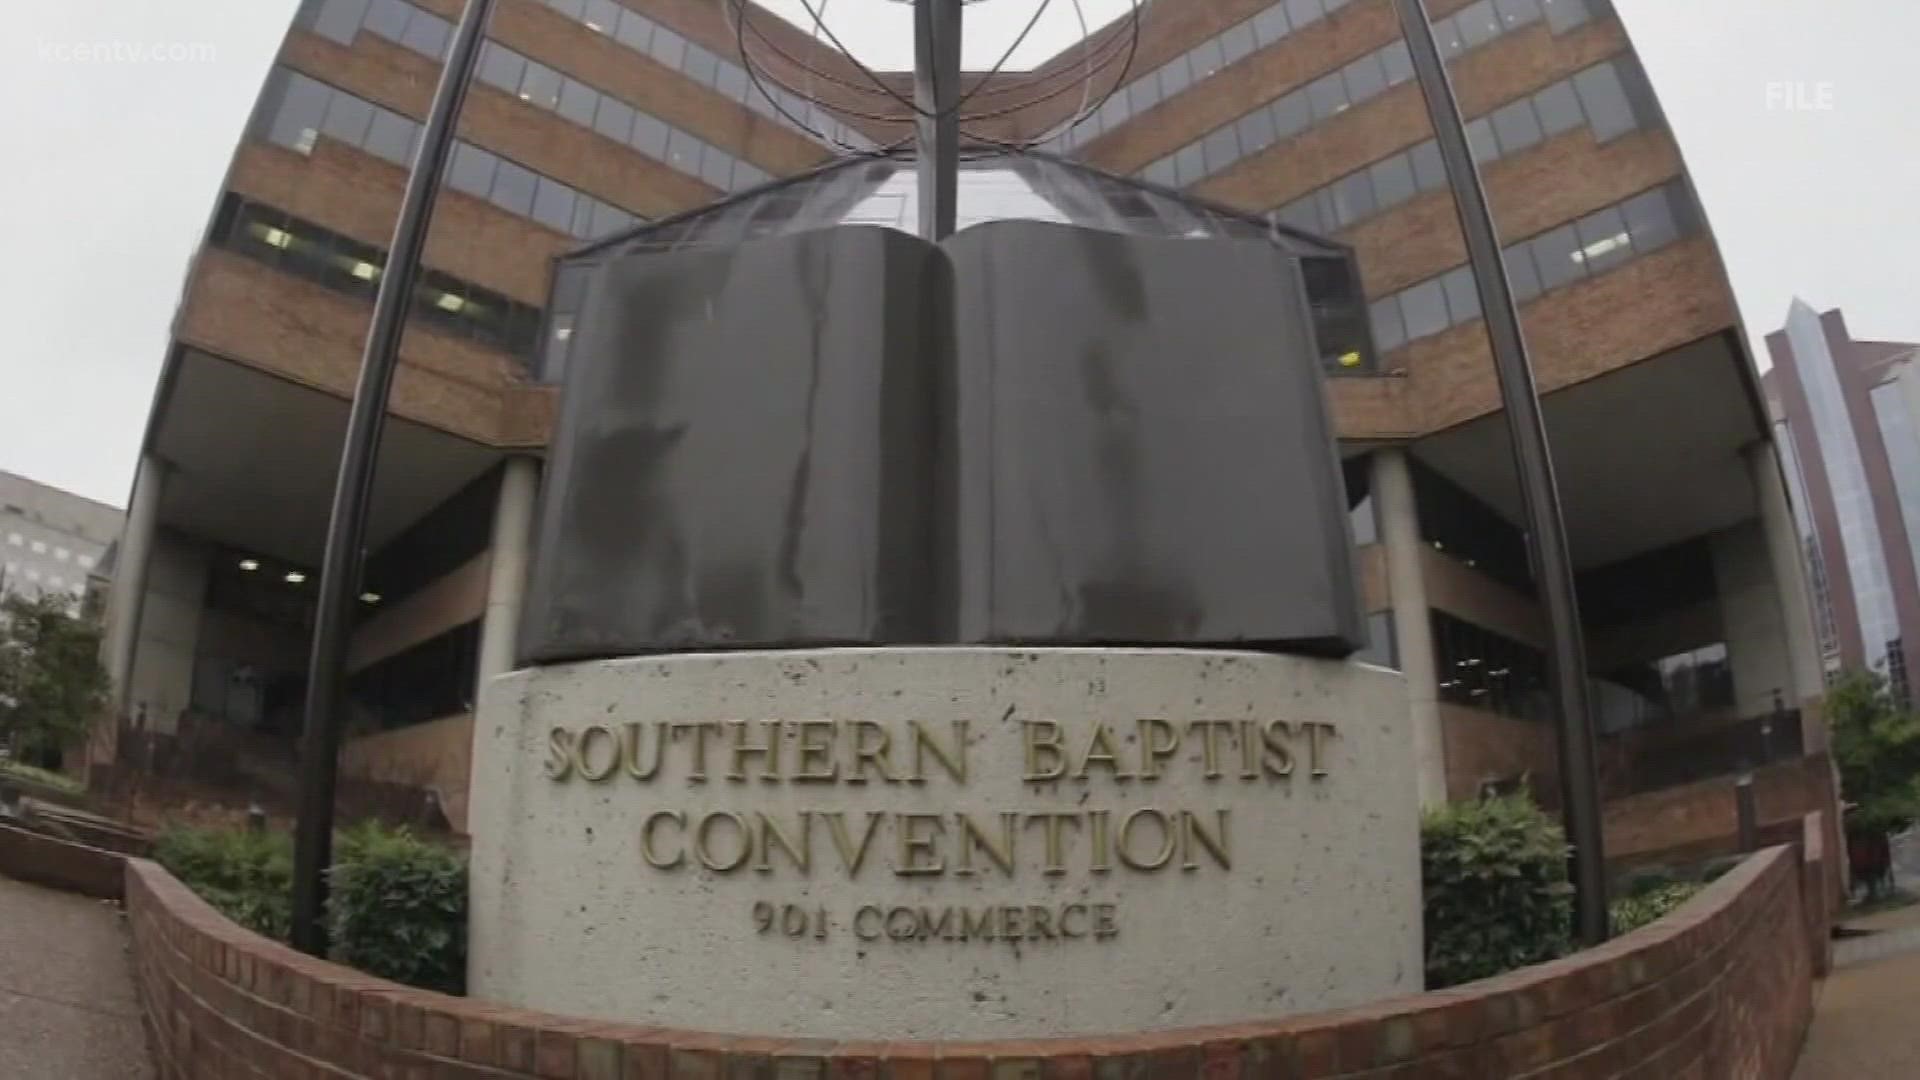 At least four men were included in list of abusers released by leaders of the Southern Baptist Convention.